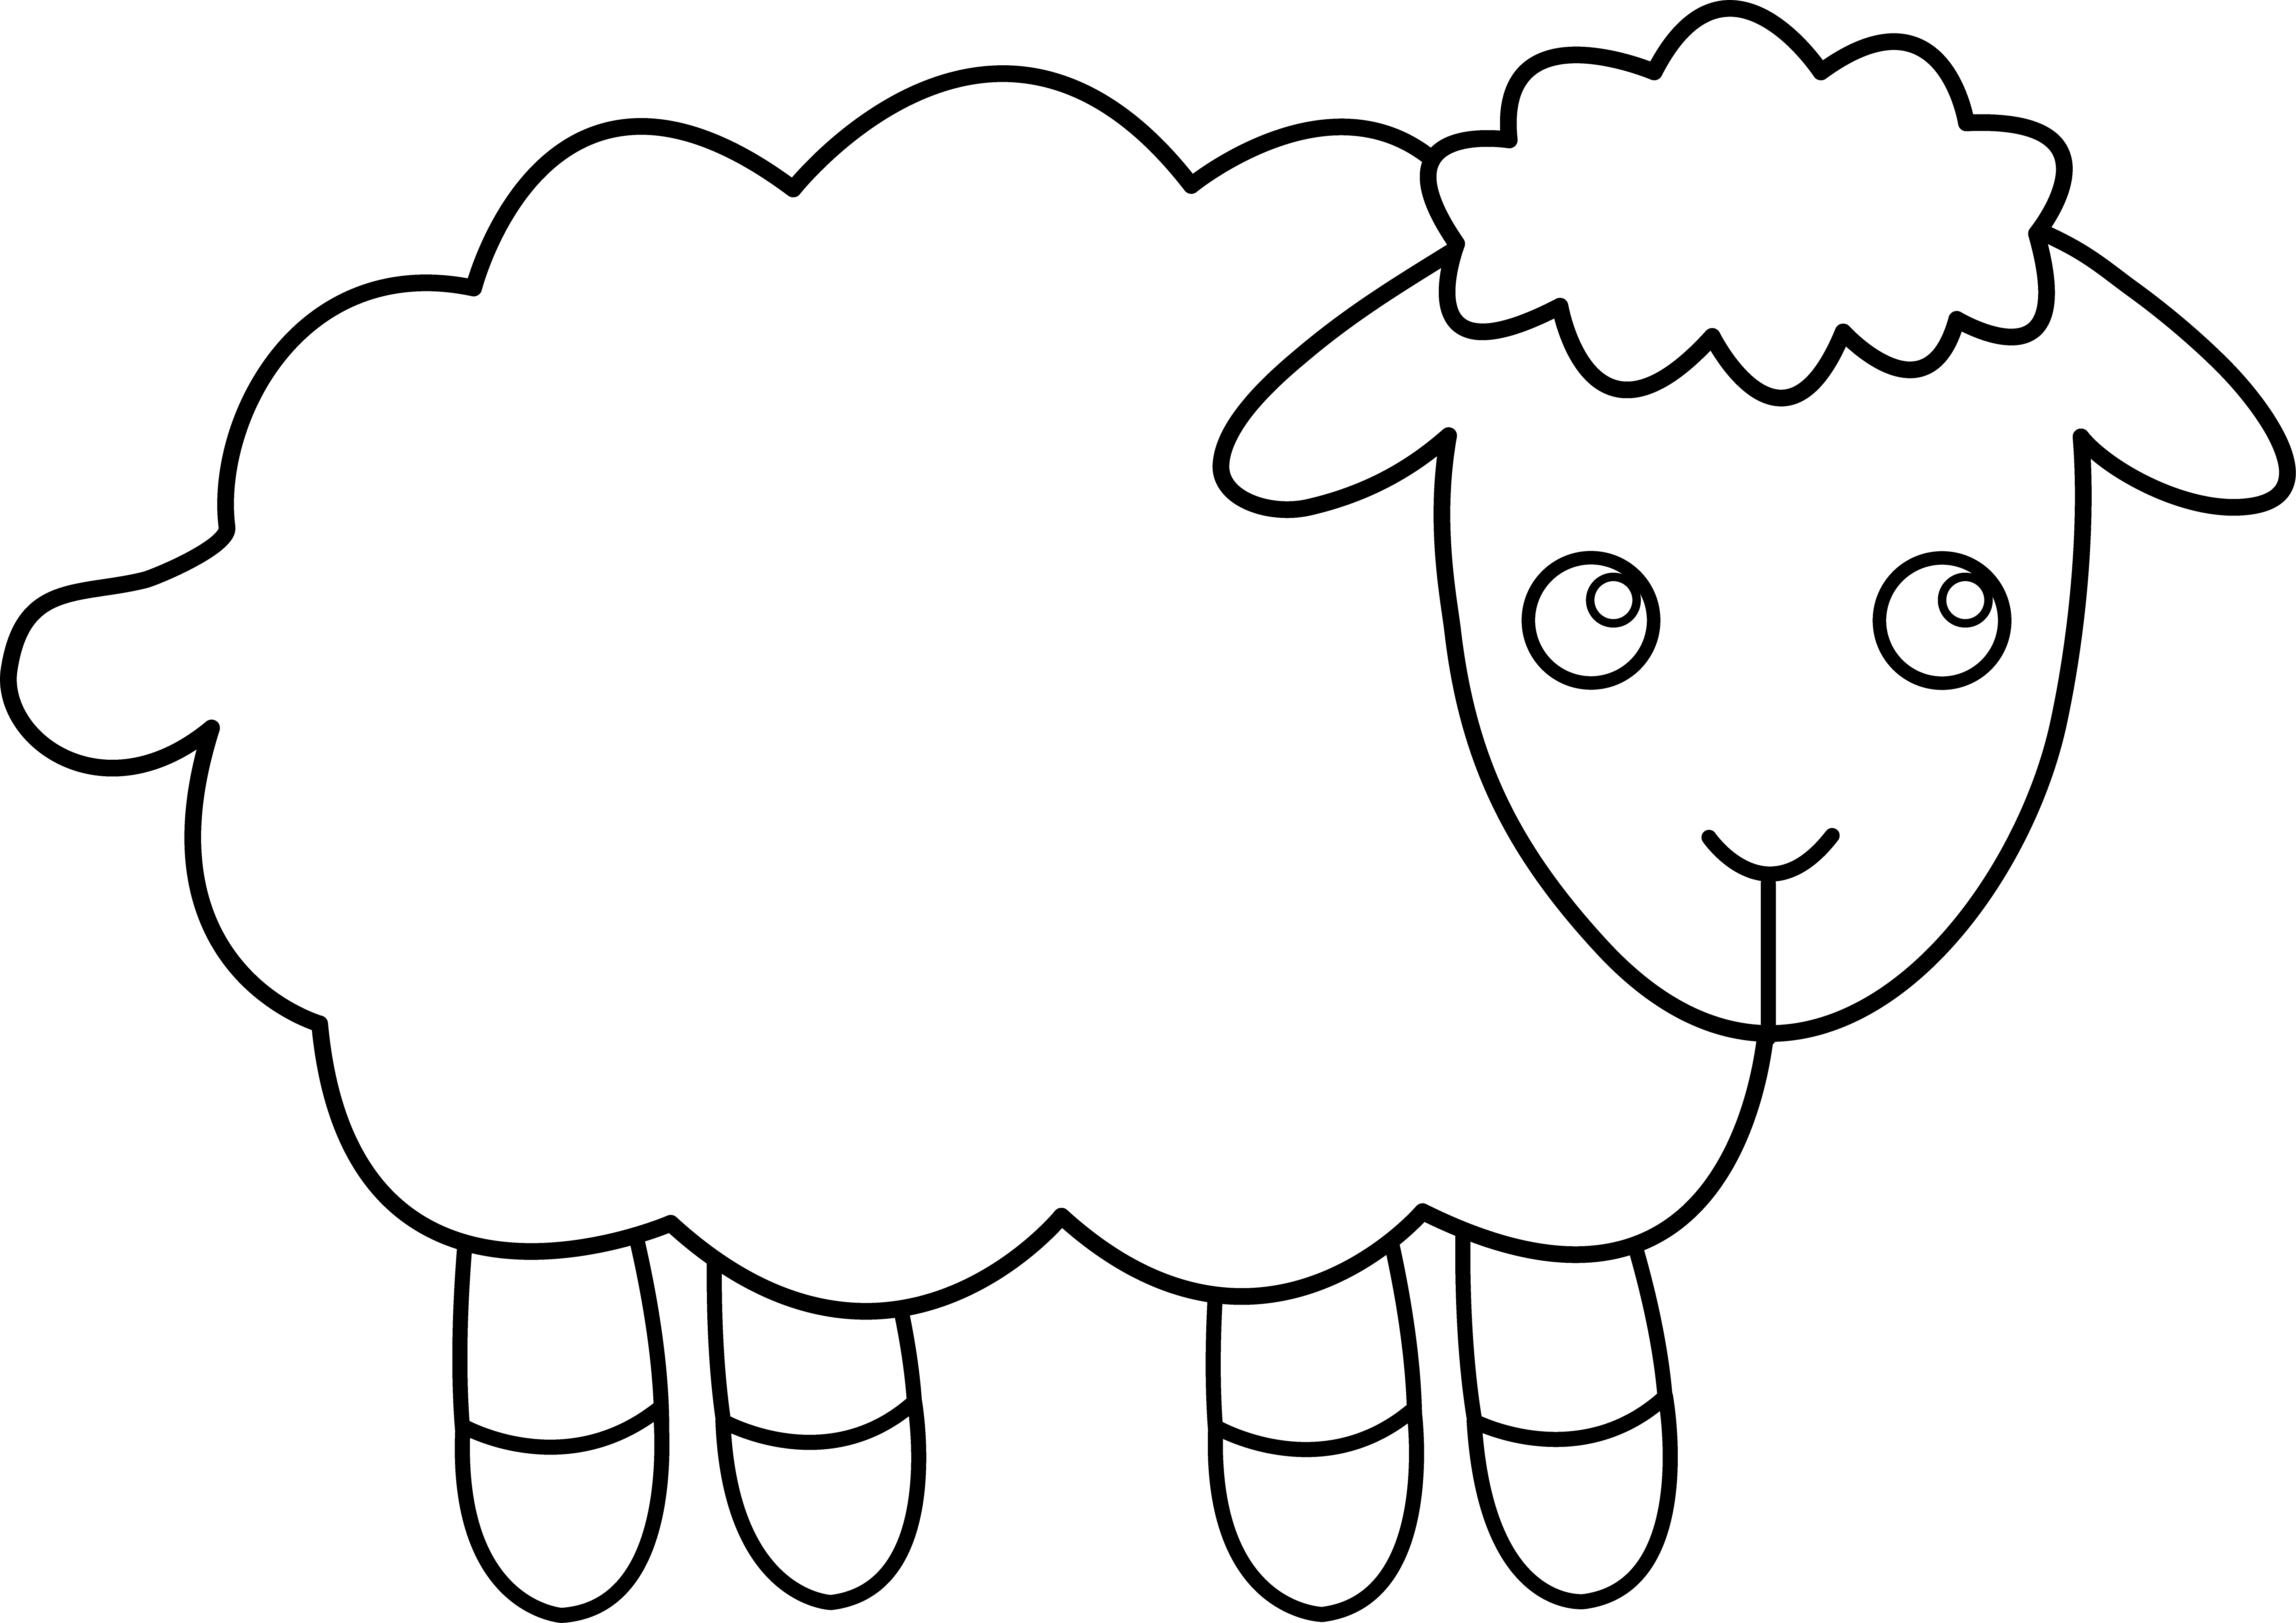 Art Free Clip Art Sheep | Clipart library - Free Clipart Images